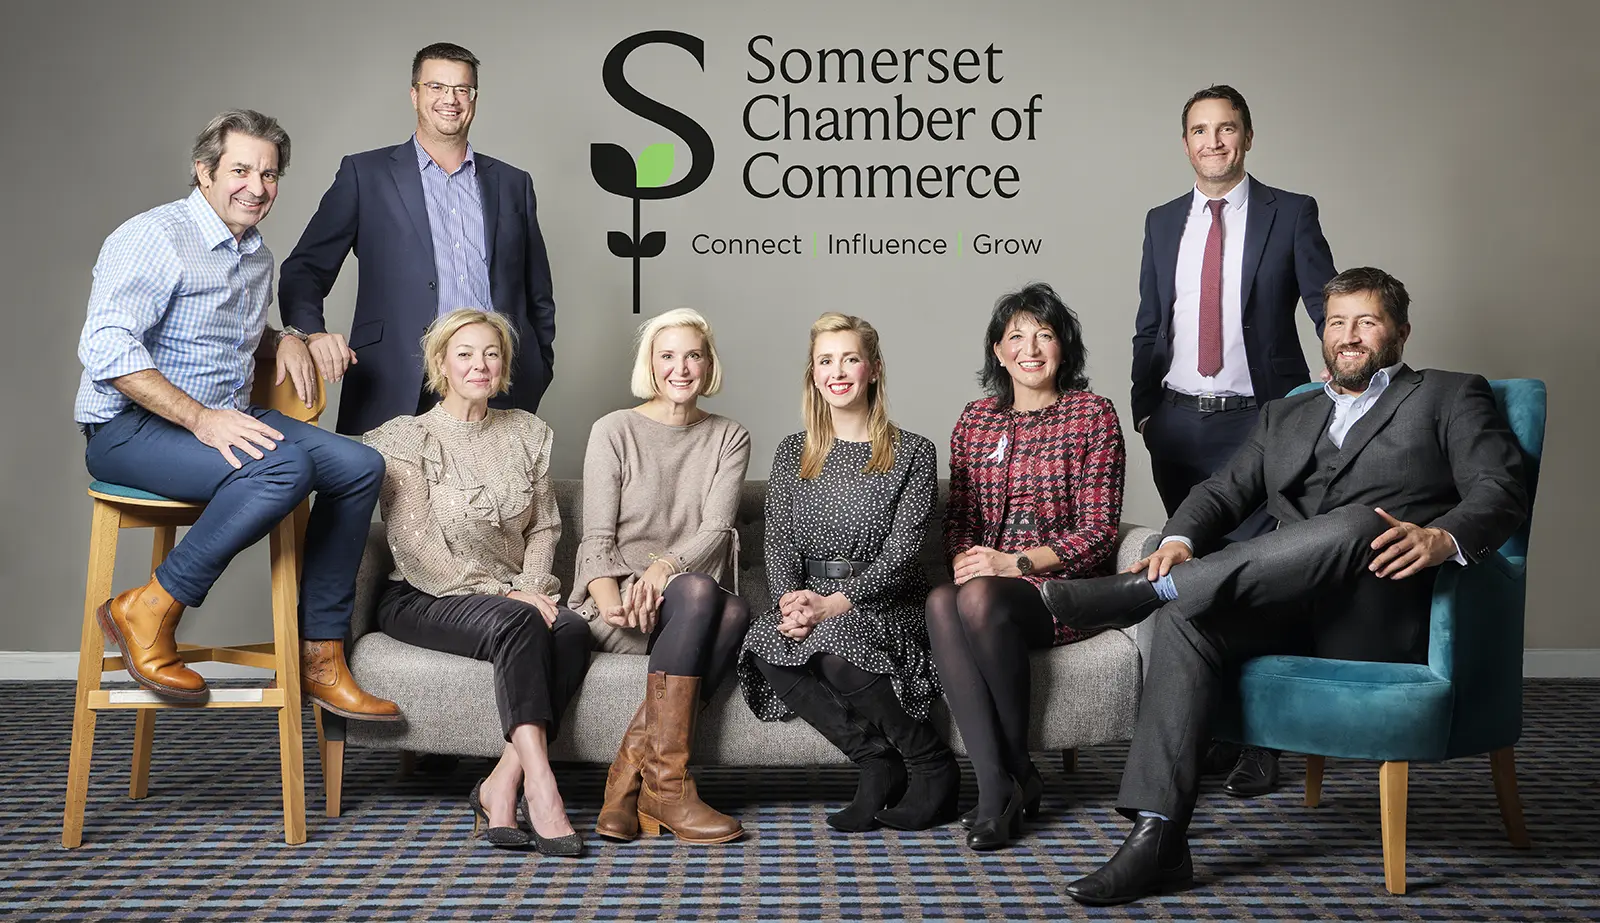 Team corporate headshots captured on location. Combined team image showing all members of the Somerset Chamber of Commerce captured at the workplace by headshot photographer Peter Nutkins